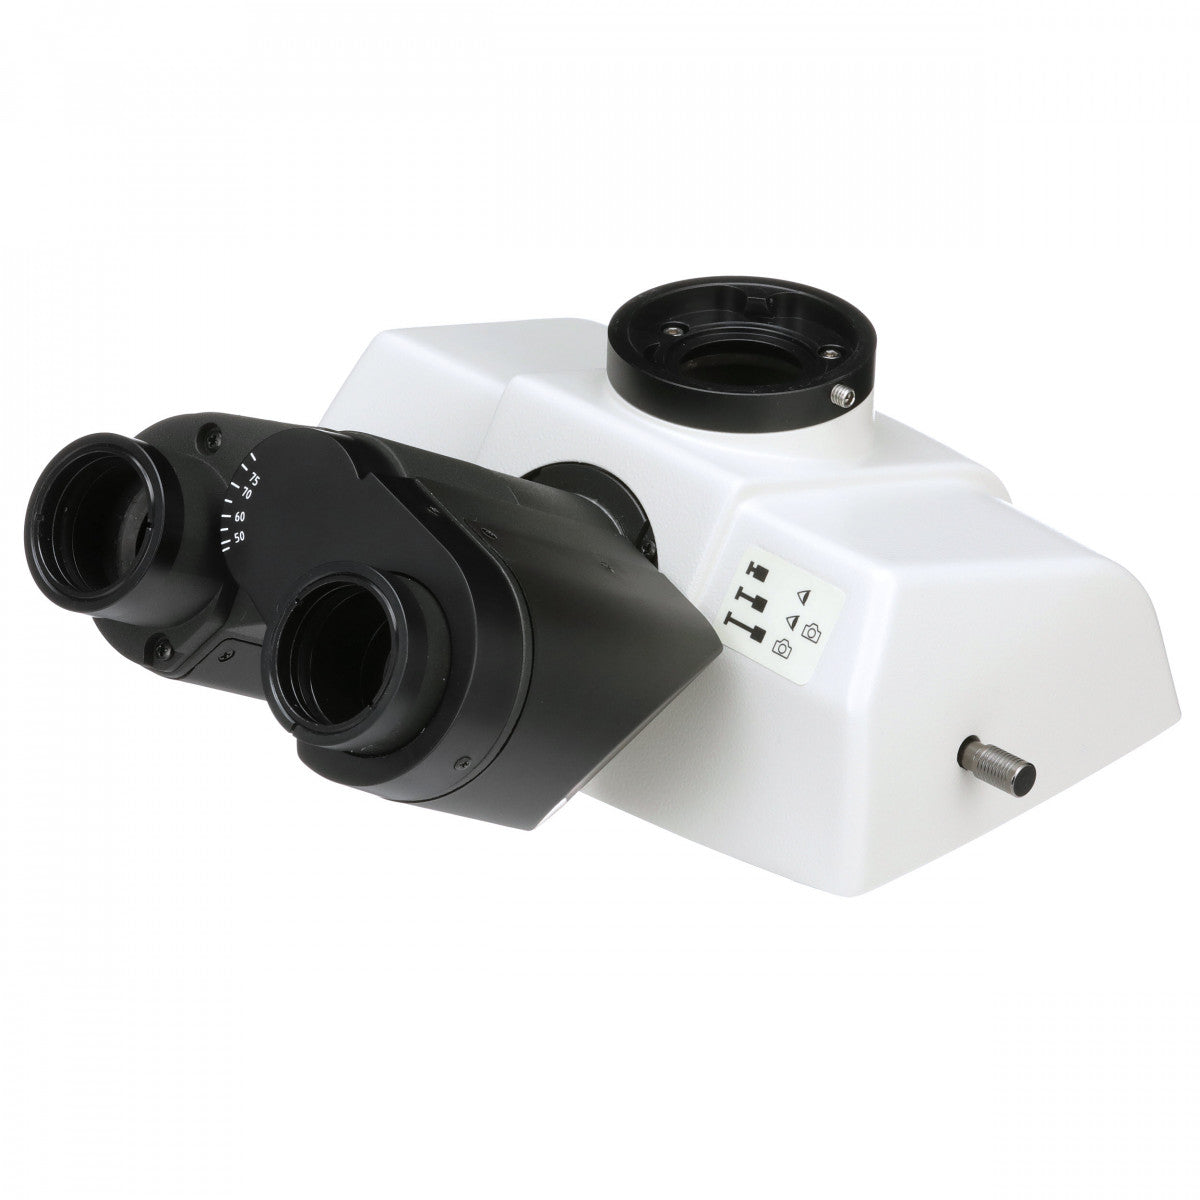 Trinocular Viewing Head Compatible With Nikon Microscopes